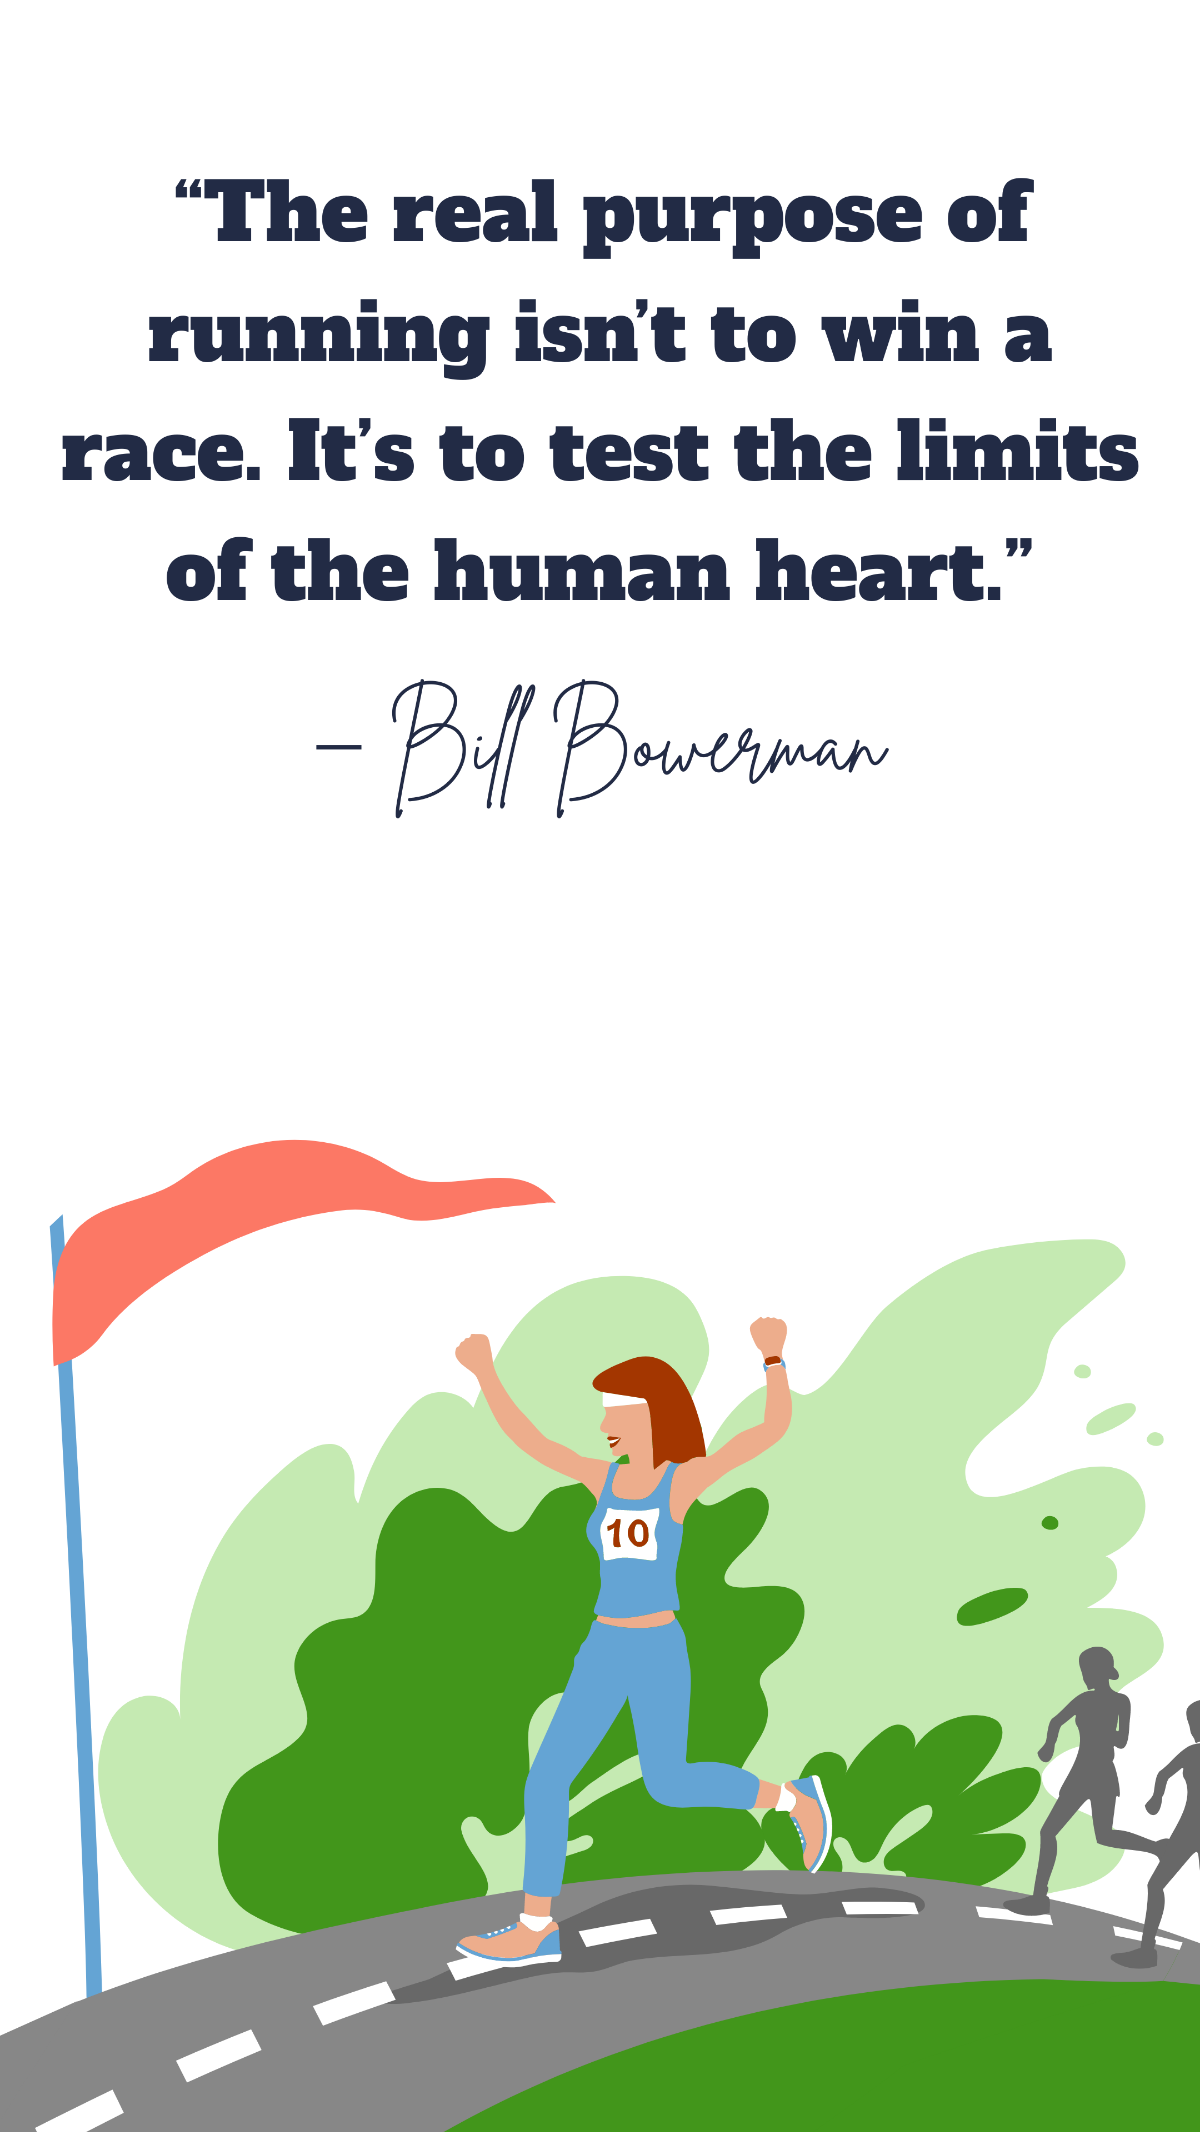 Free Bill Bowerman-The real purpose of running isn’t to win a race. It’s to test the limits of the human heart. Template